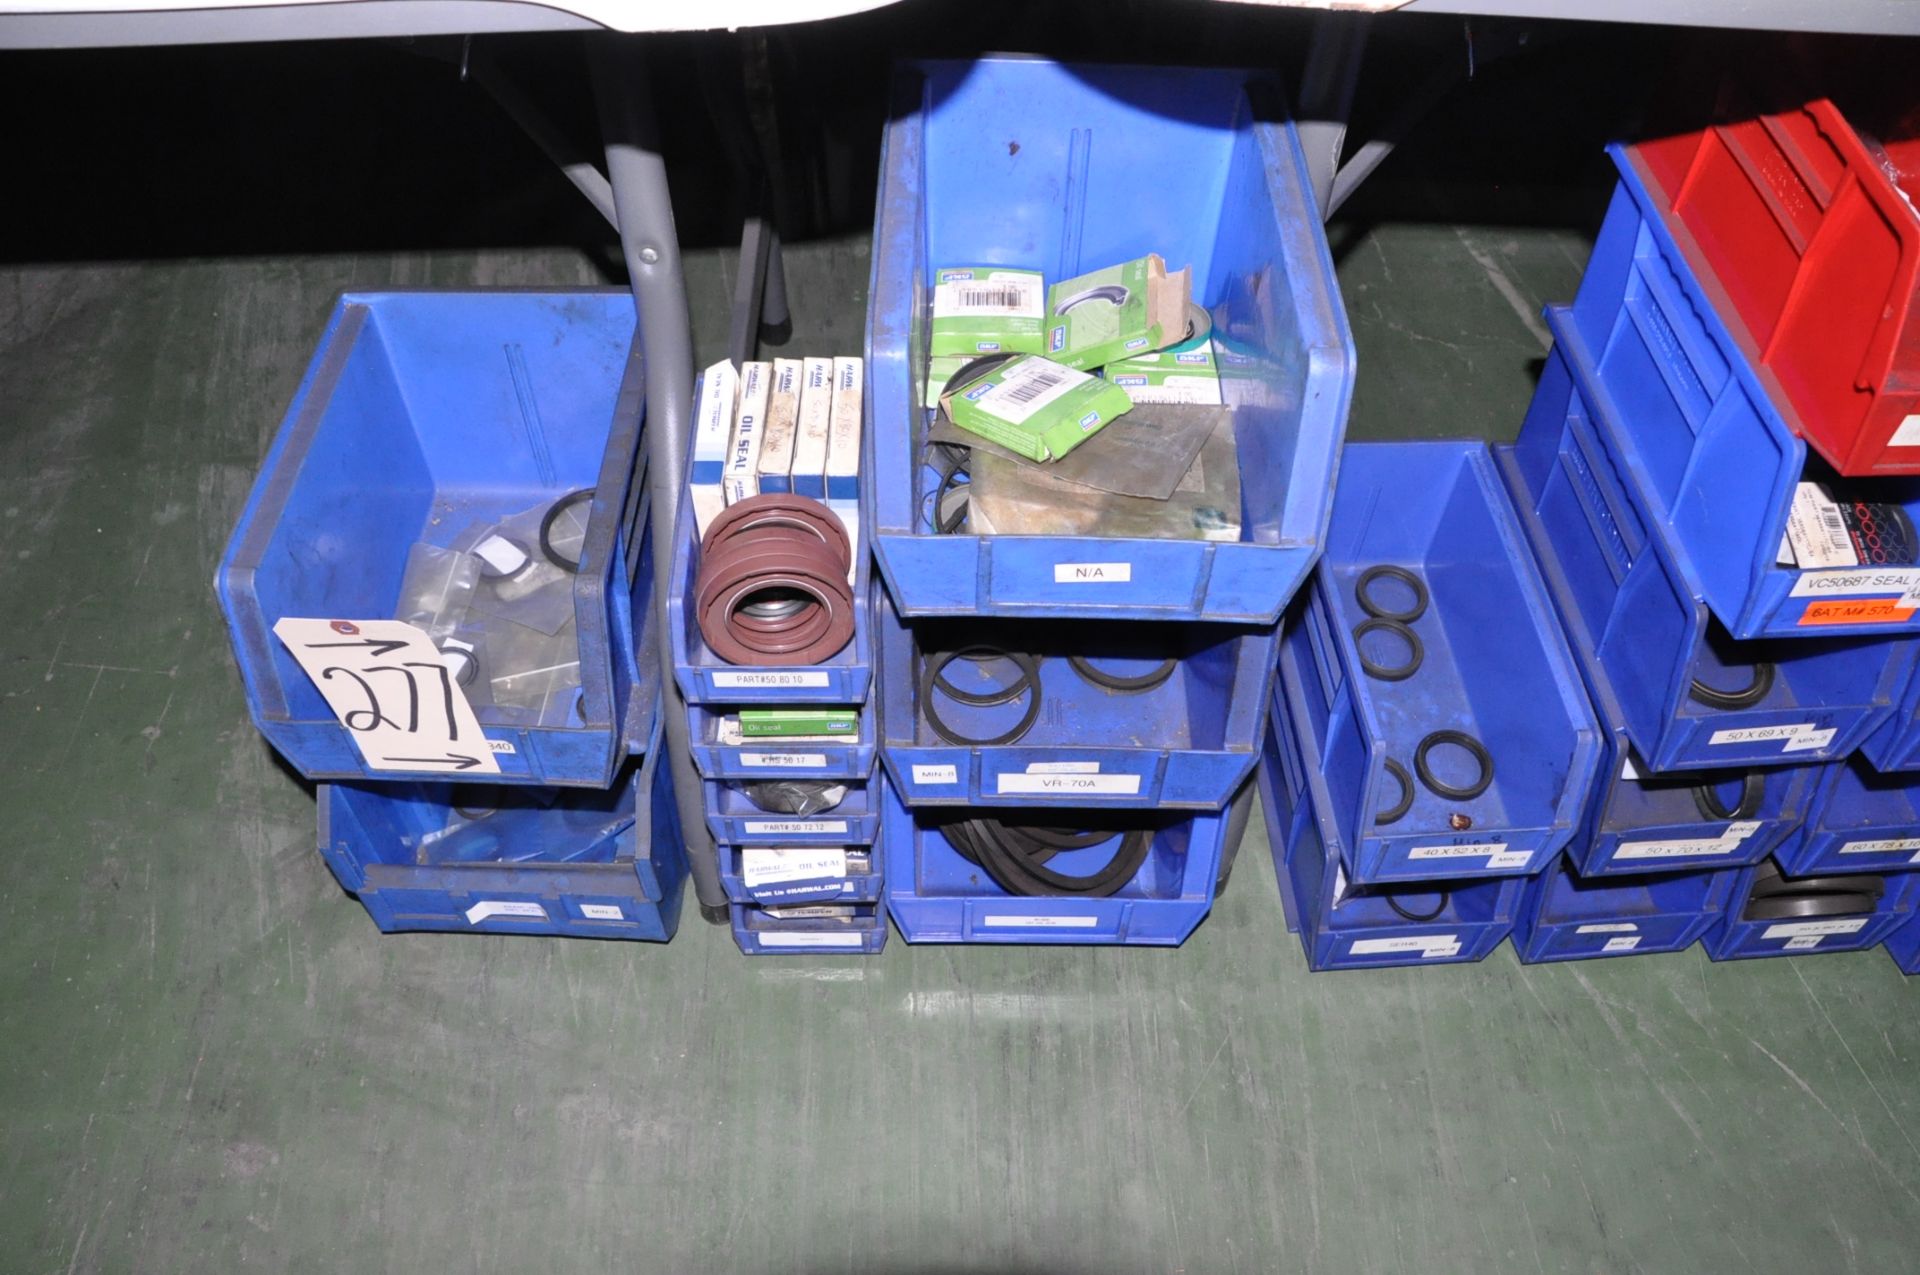 Lot-Various Bearing Seals in Blue Parts Bins on Floor Under (3) Tables, (E-3) - Image 2 of 6